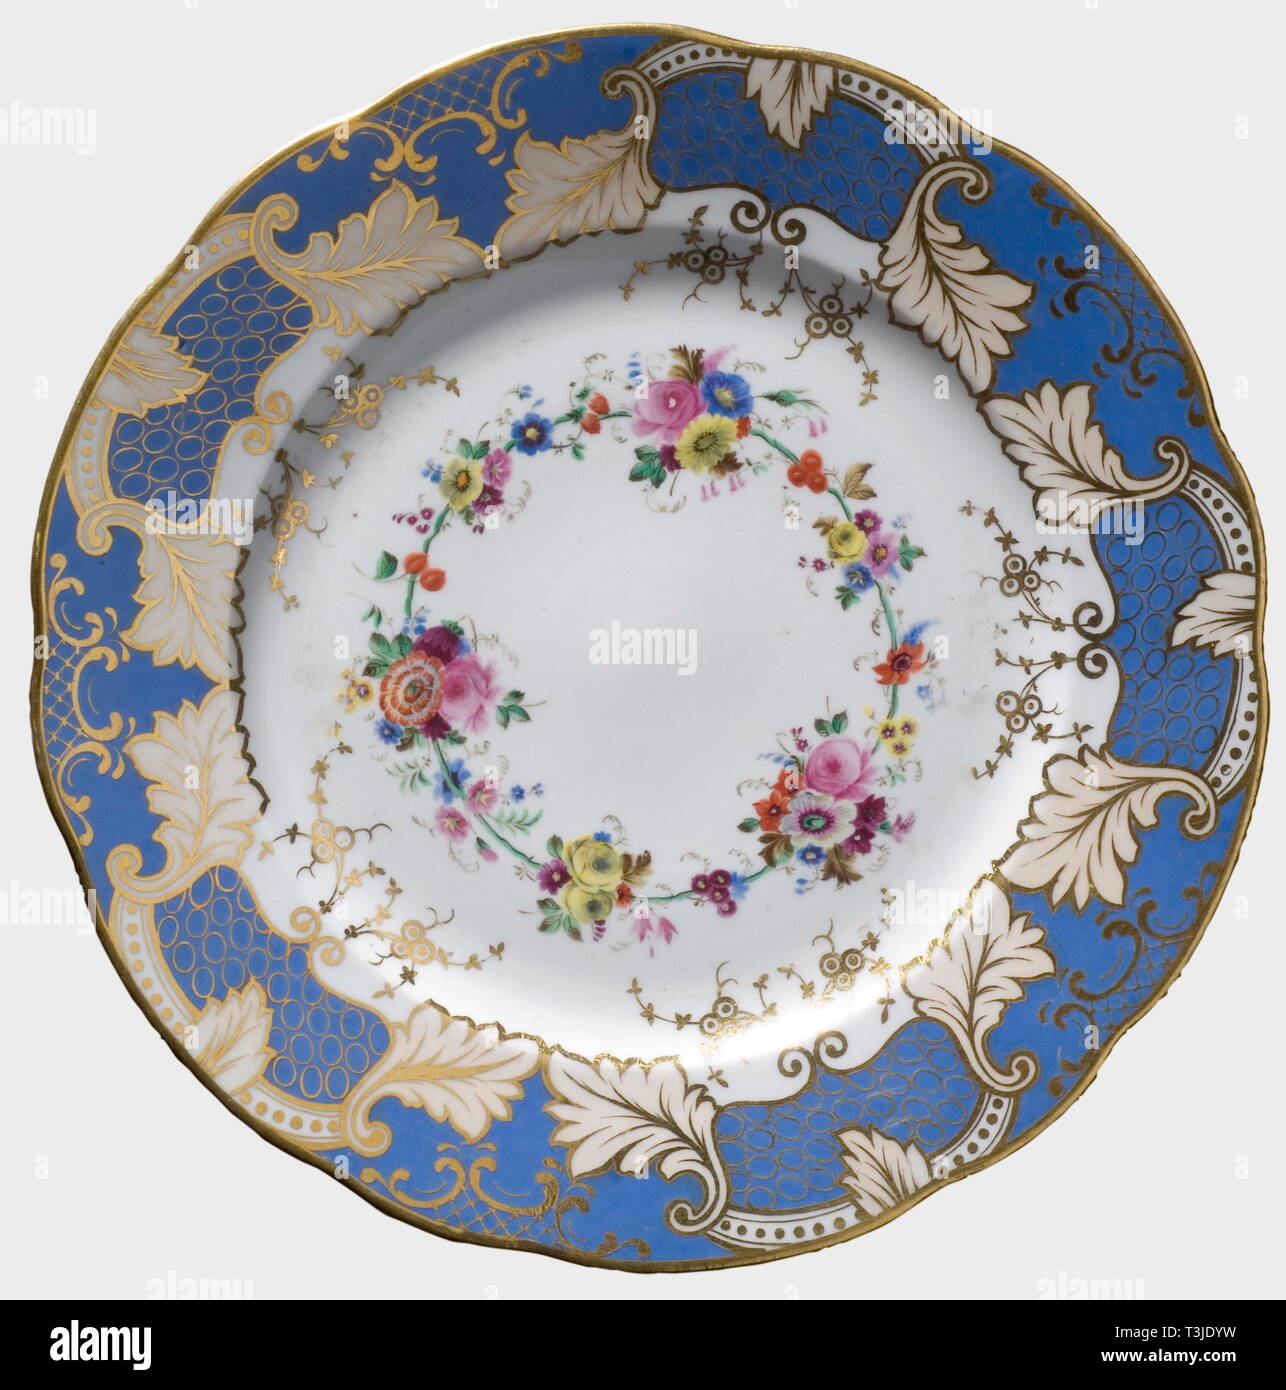 Two plates from the dowry, Imperial Russian Porcelain Manufactory St. Petersburg White, glazed porcelain, the light blue border with golden cartouches and leaves decoration, in the centre hand-painted flower décor. On the bottom steel blue underglaze mark "N I" of the Imperial Manufactory St. Petersburg, one plate with the monogram "R". Diameter 25 cm. In addition one original protective cover made of light rose-coloured velvet. This service was a present of her father Tsar Nikolas I and part of her dowry. Of excellent preservation and workmanshi, Additional-Rights-Clearance-Info-Not-Available Stock Photo